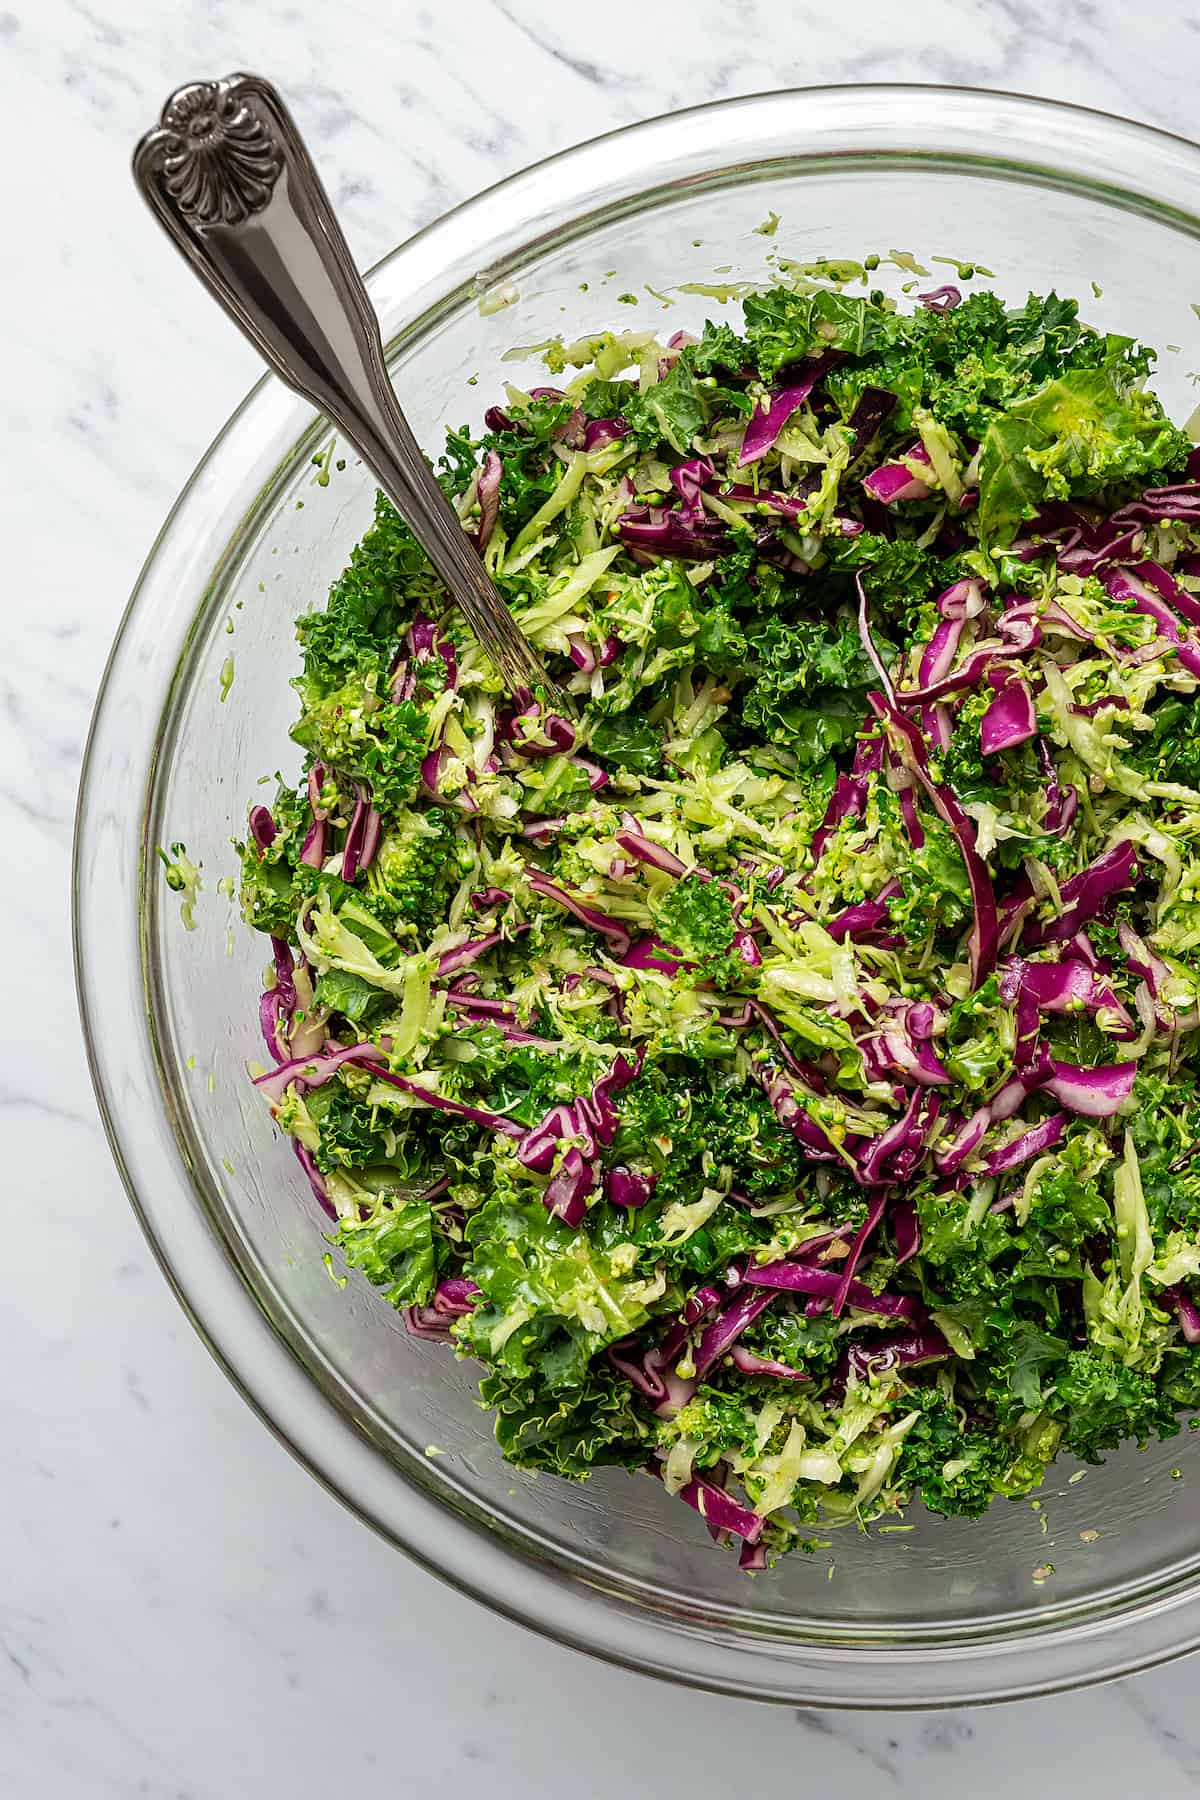 Homemade broccoli slaw in a mixing bowl.